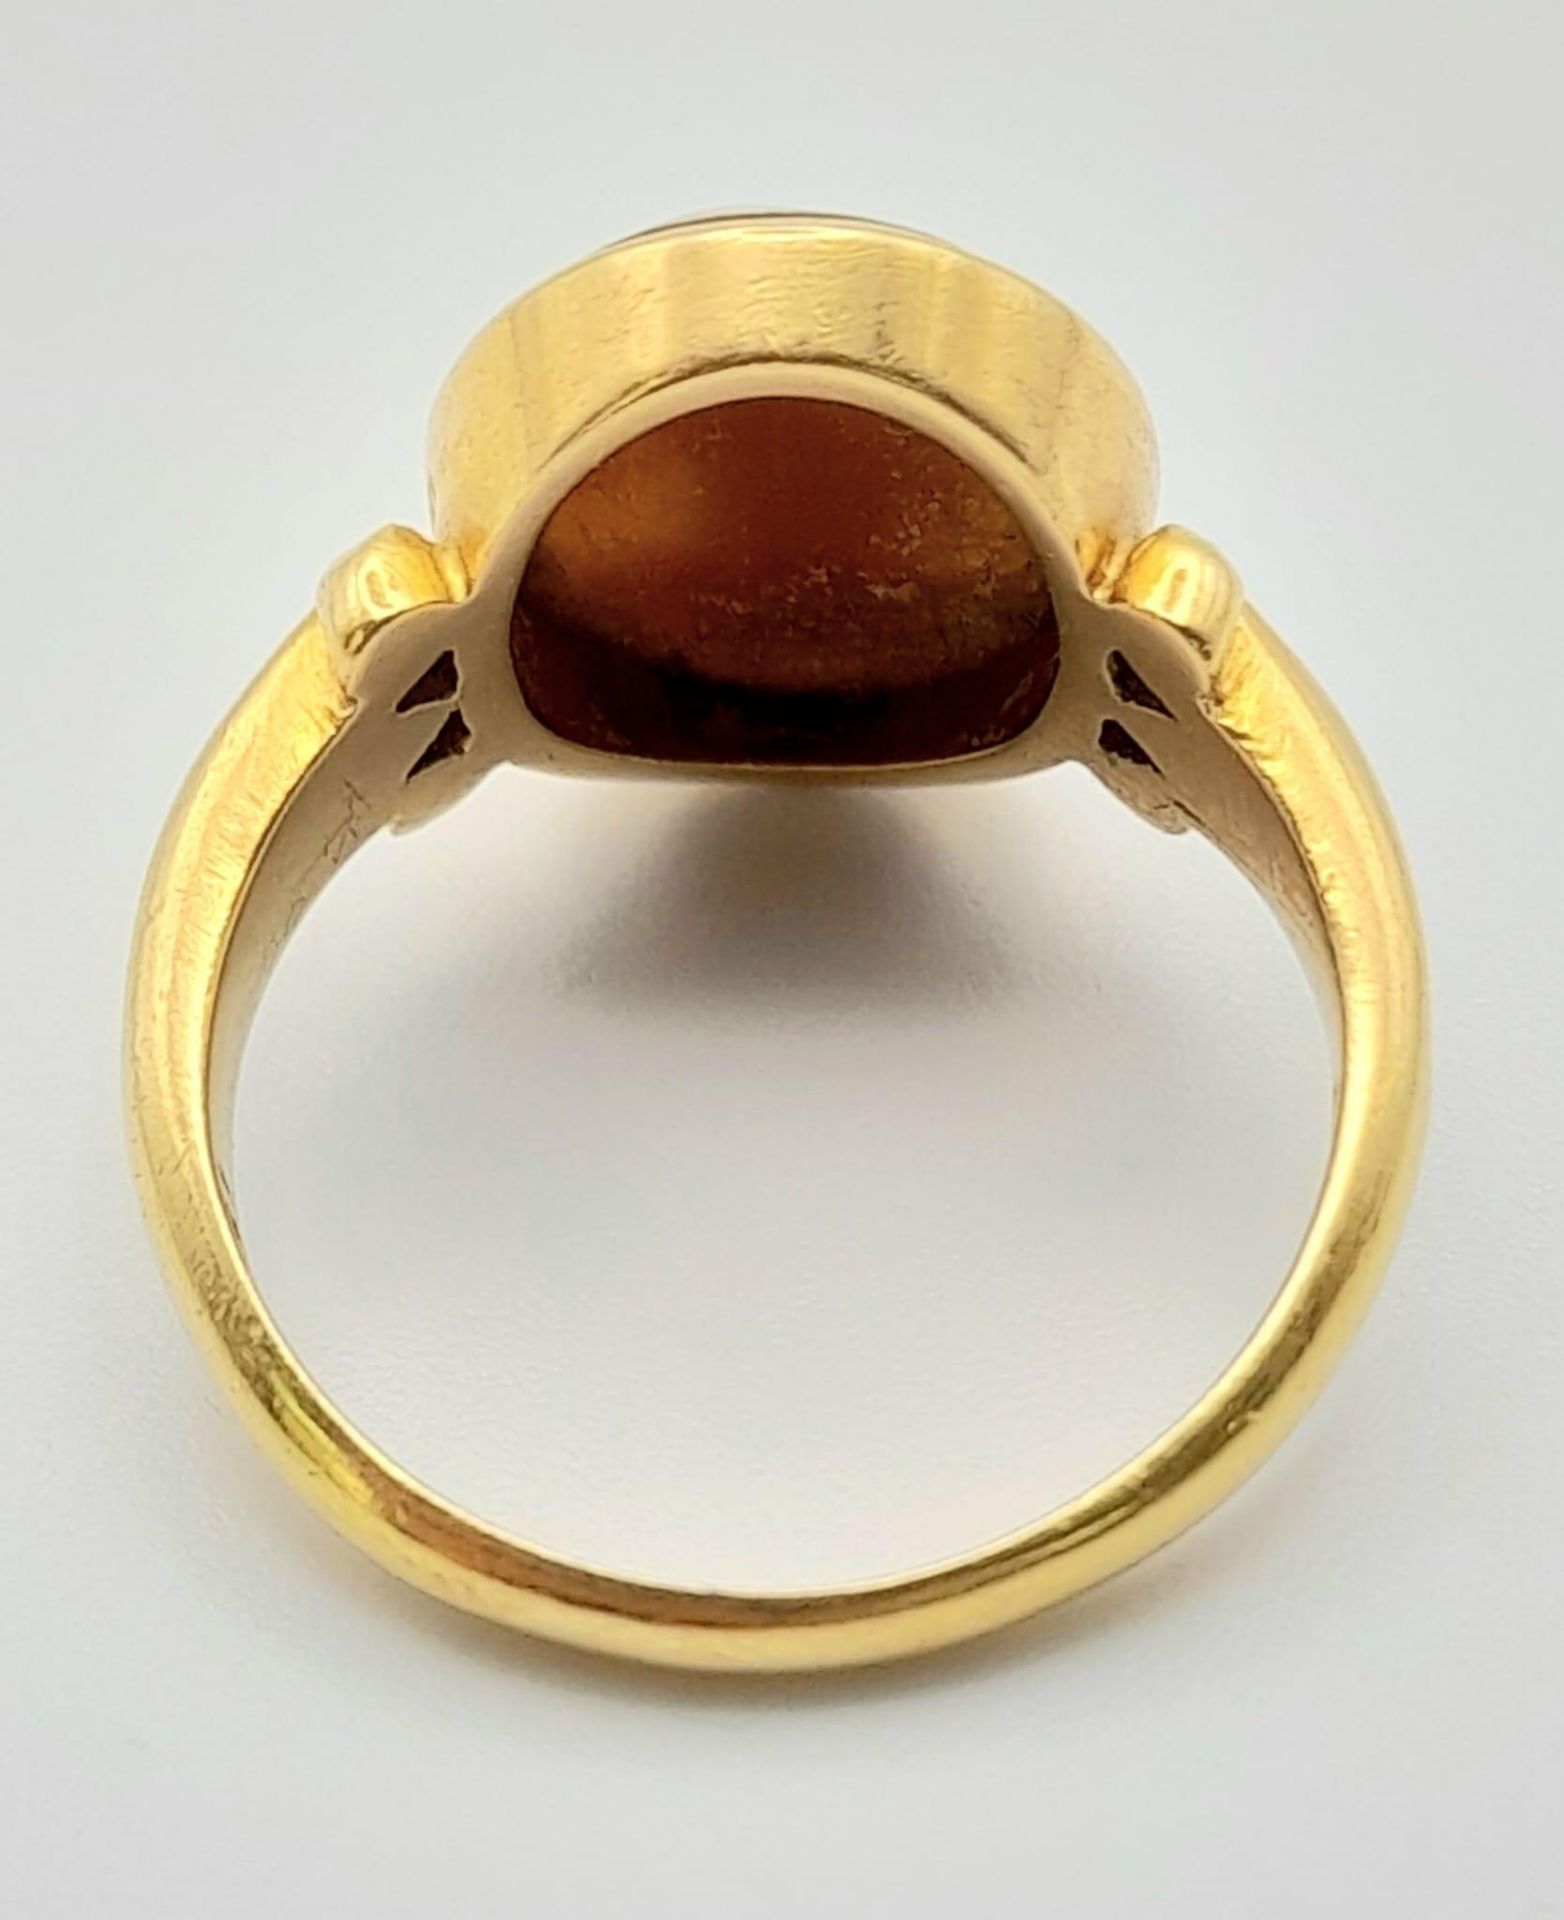 A Vintage 18K Yellow Gold Cameo Ring. Size N. 5.4g total weight. - Image 4 of 7